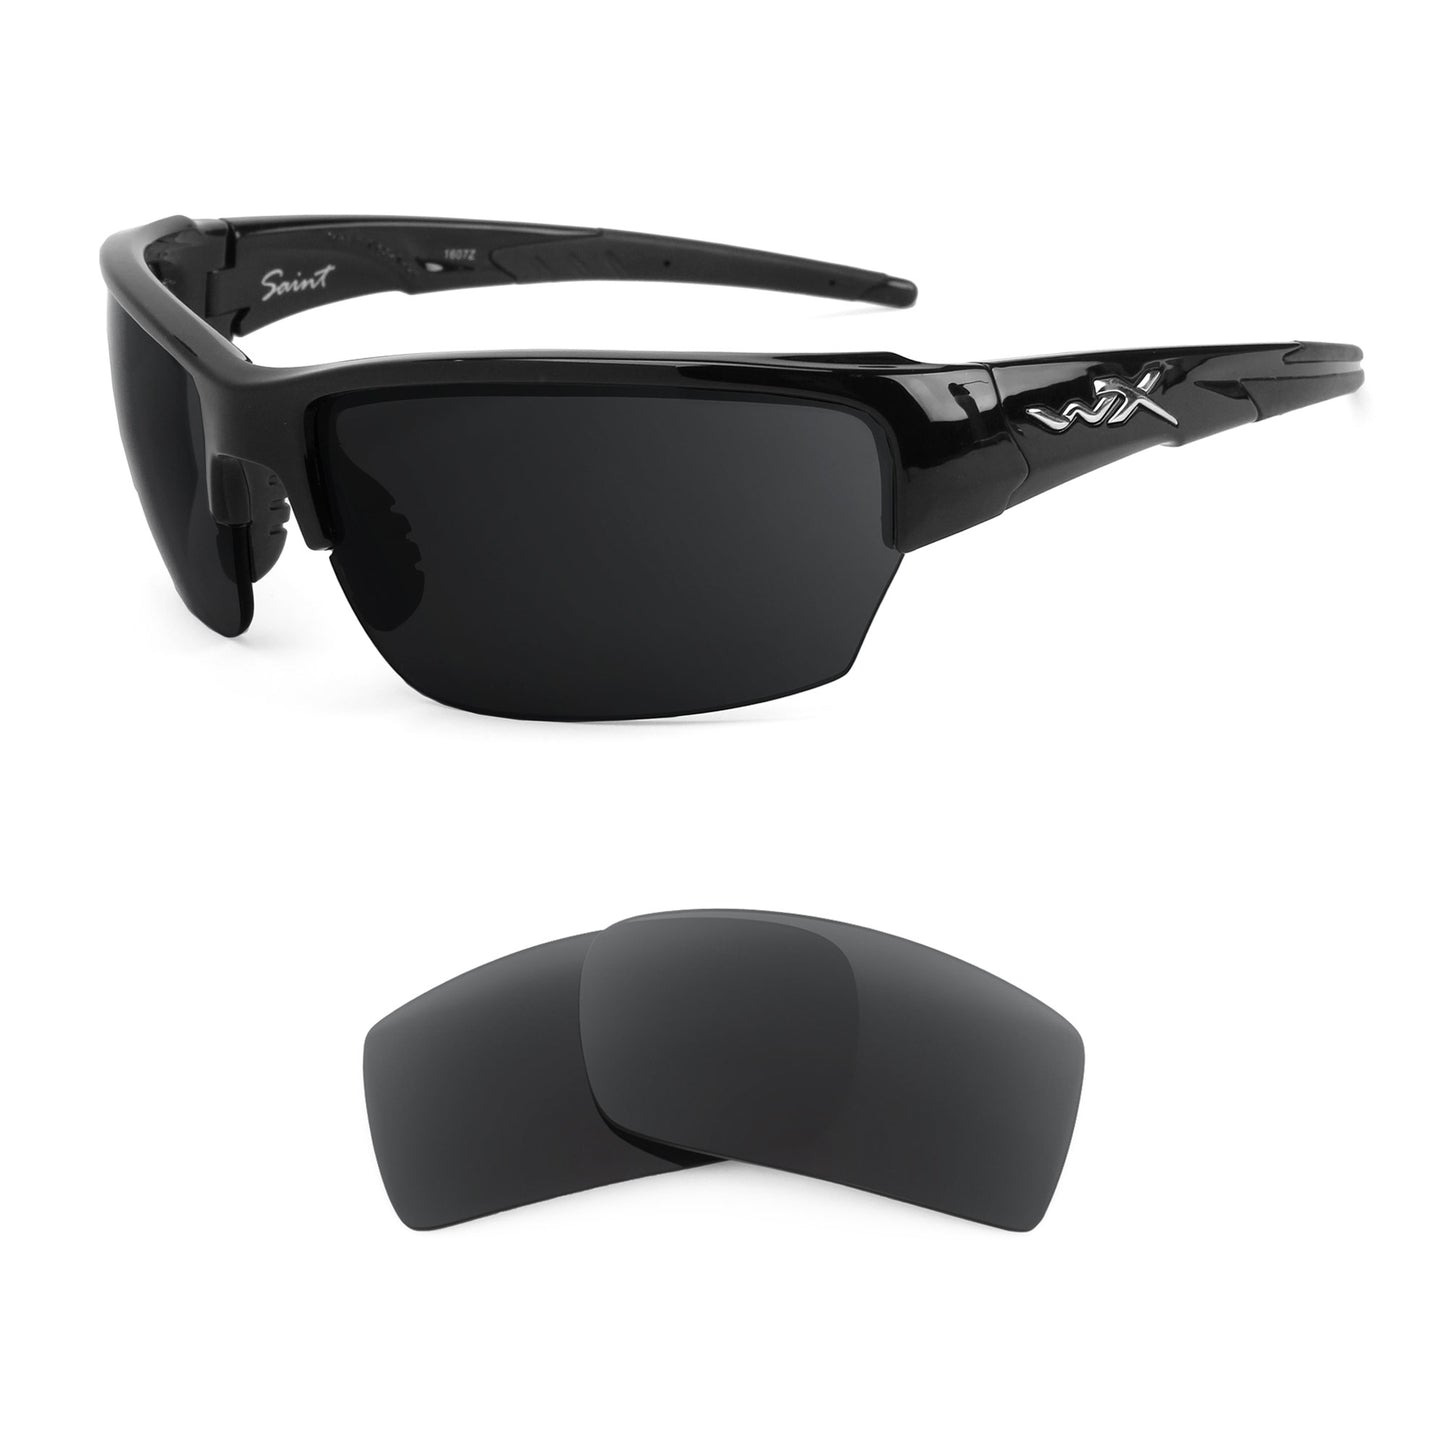 Wiley X Saint sunglasses with replacement lenses